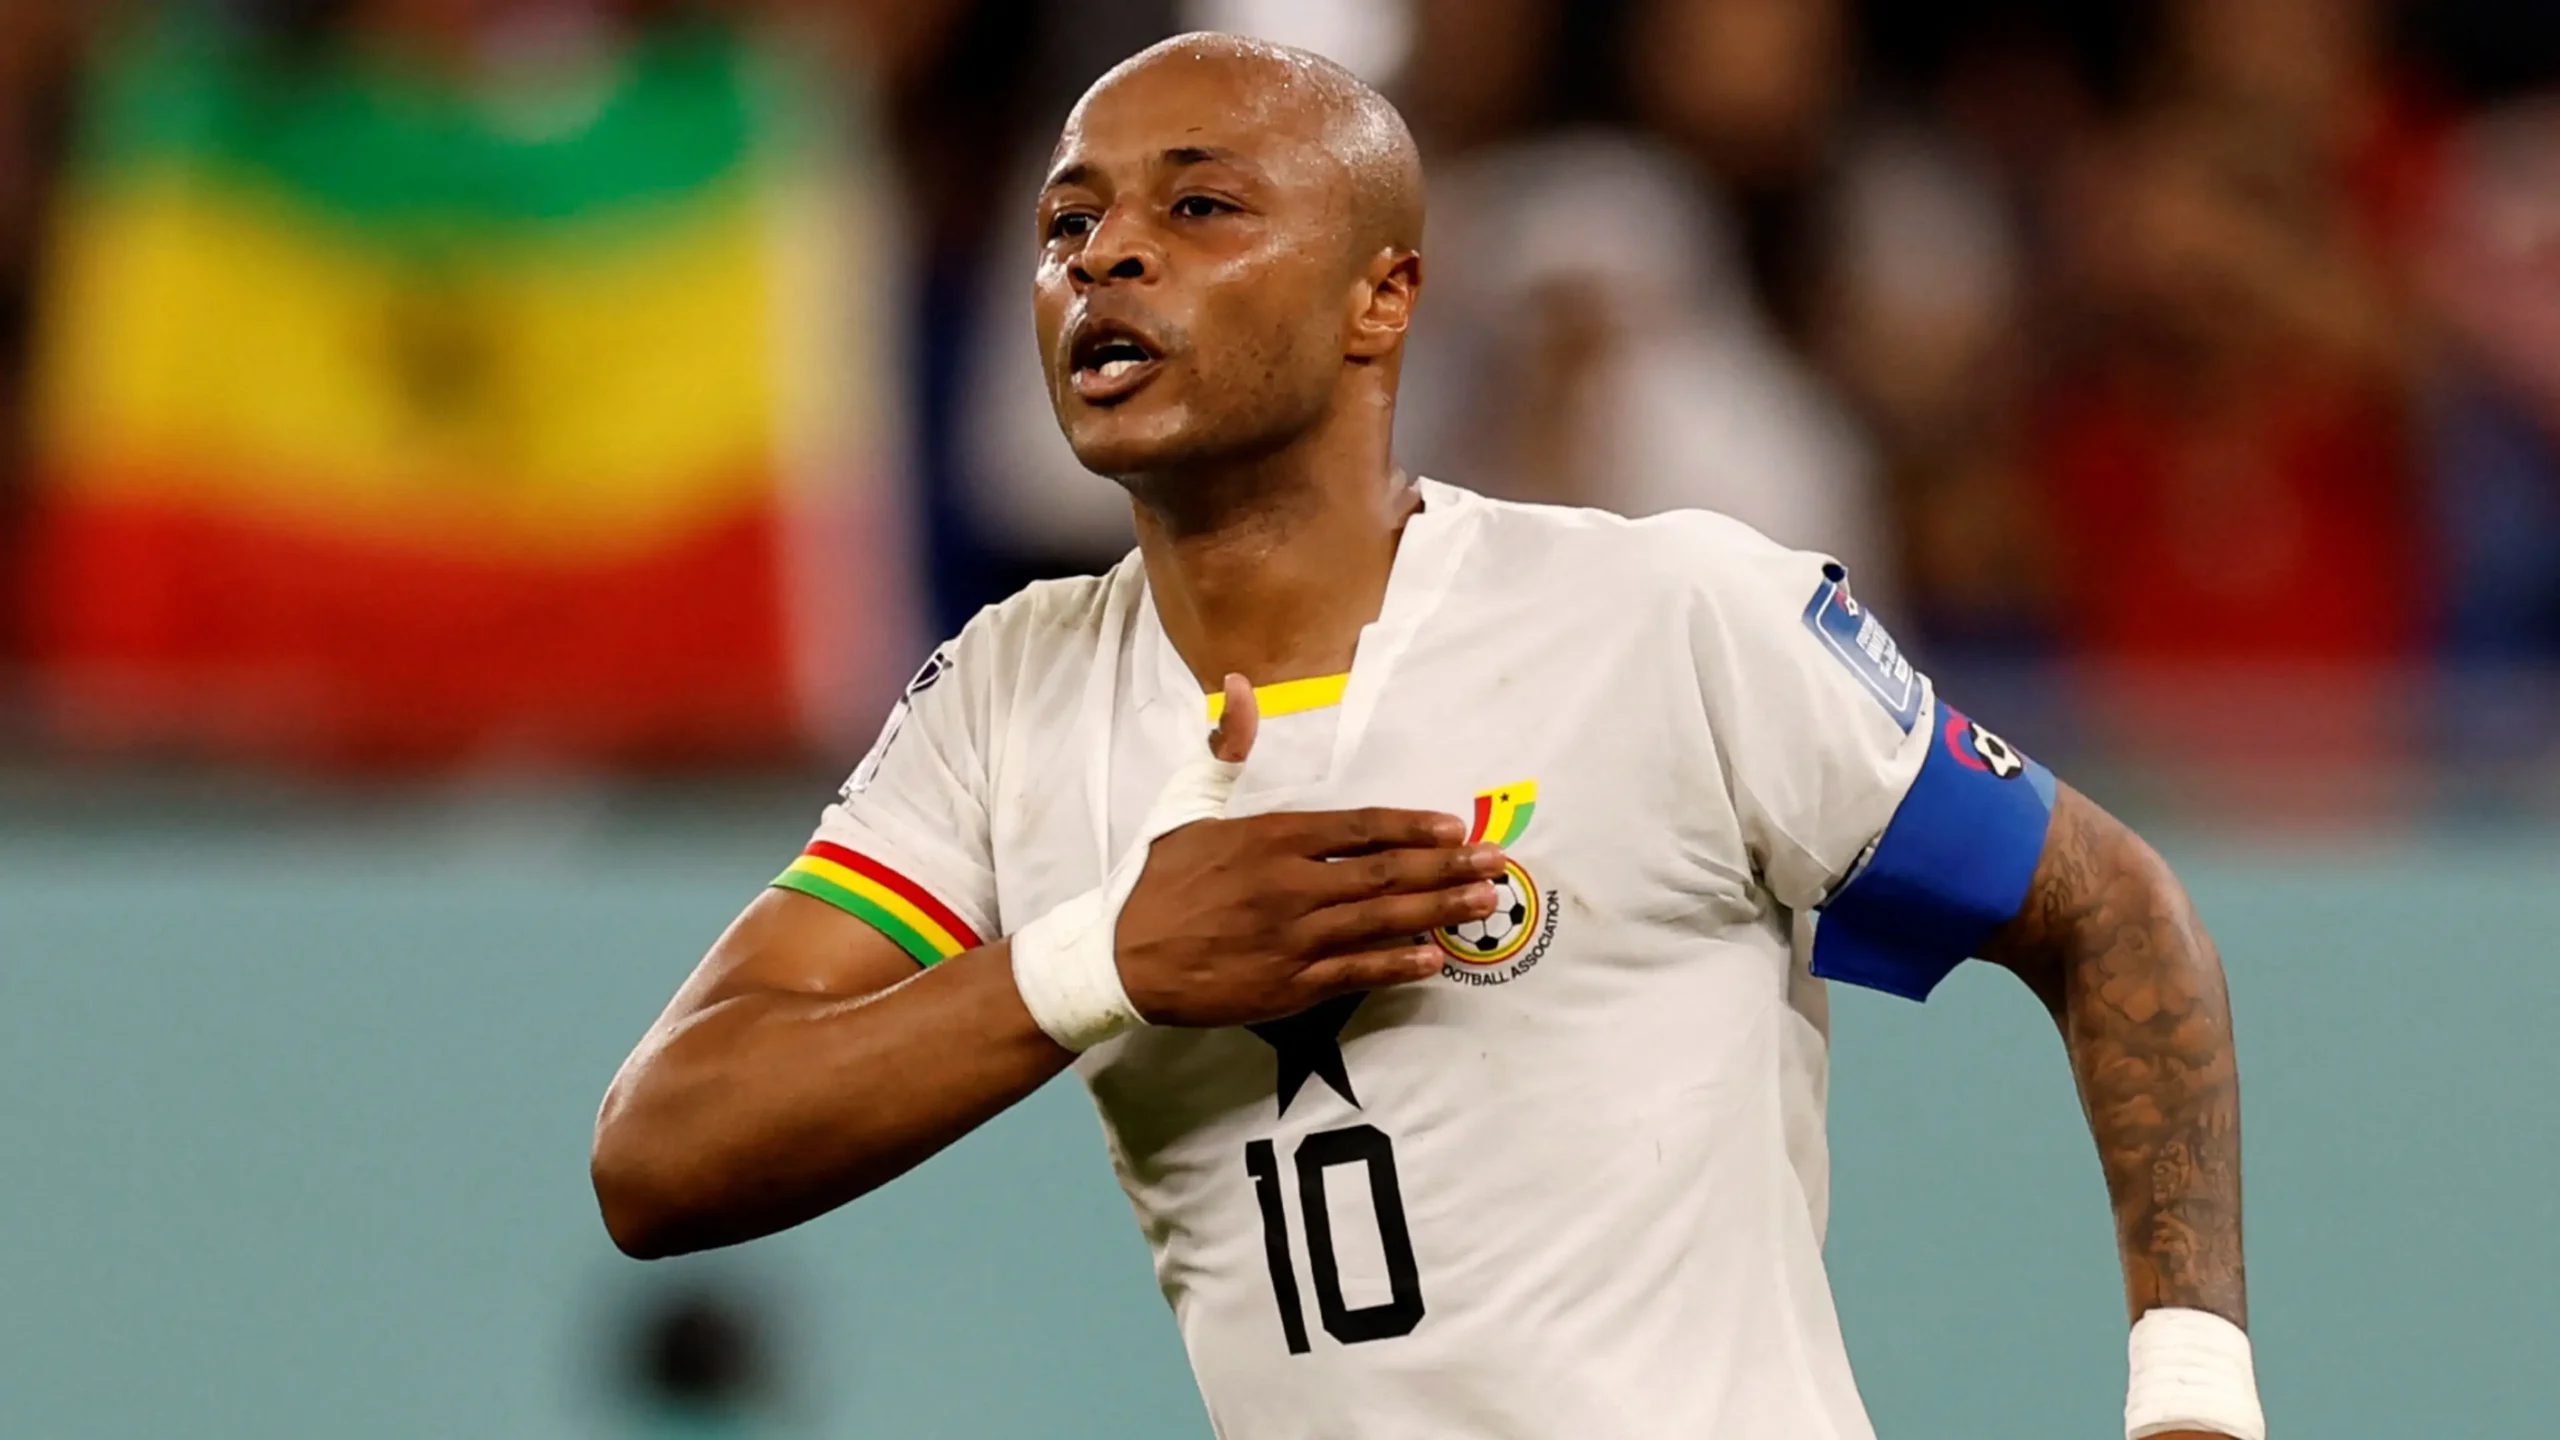 The AFCON is harder to win than the World Cup, says Dede Ayew